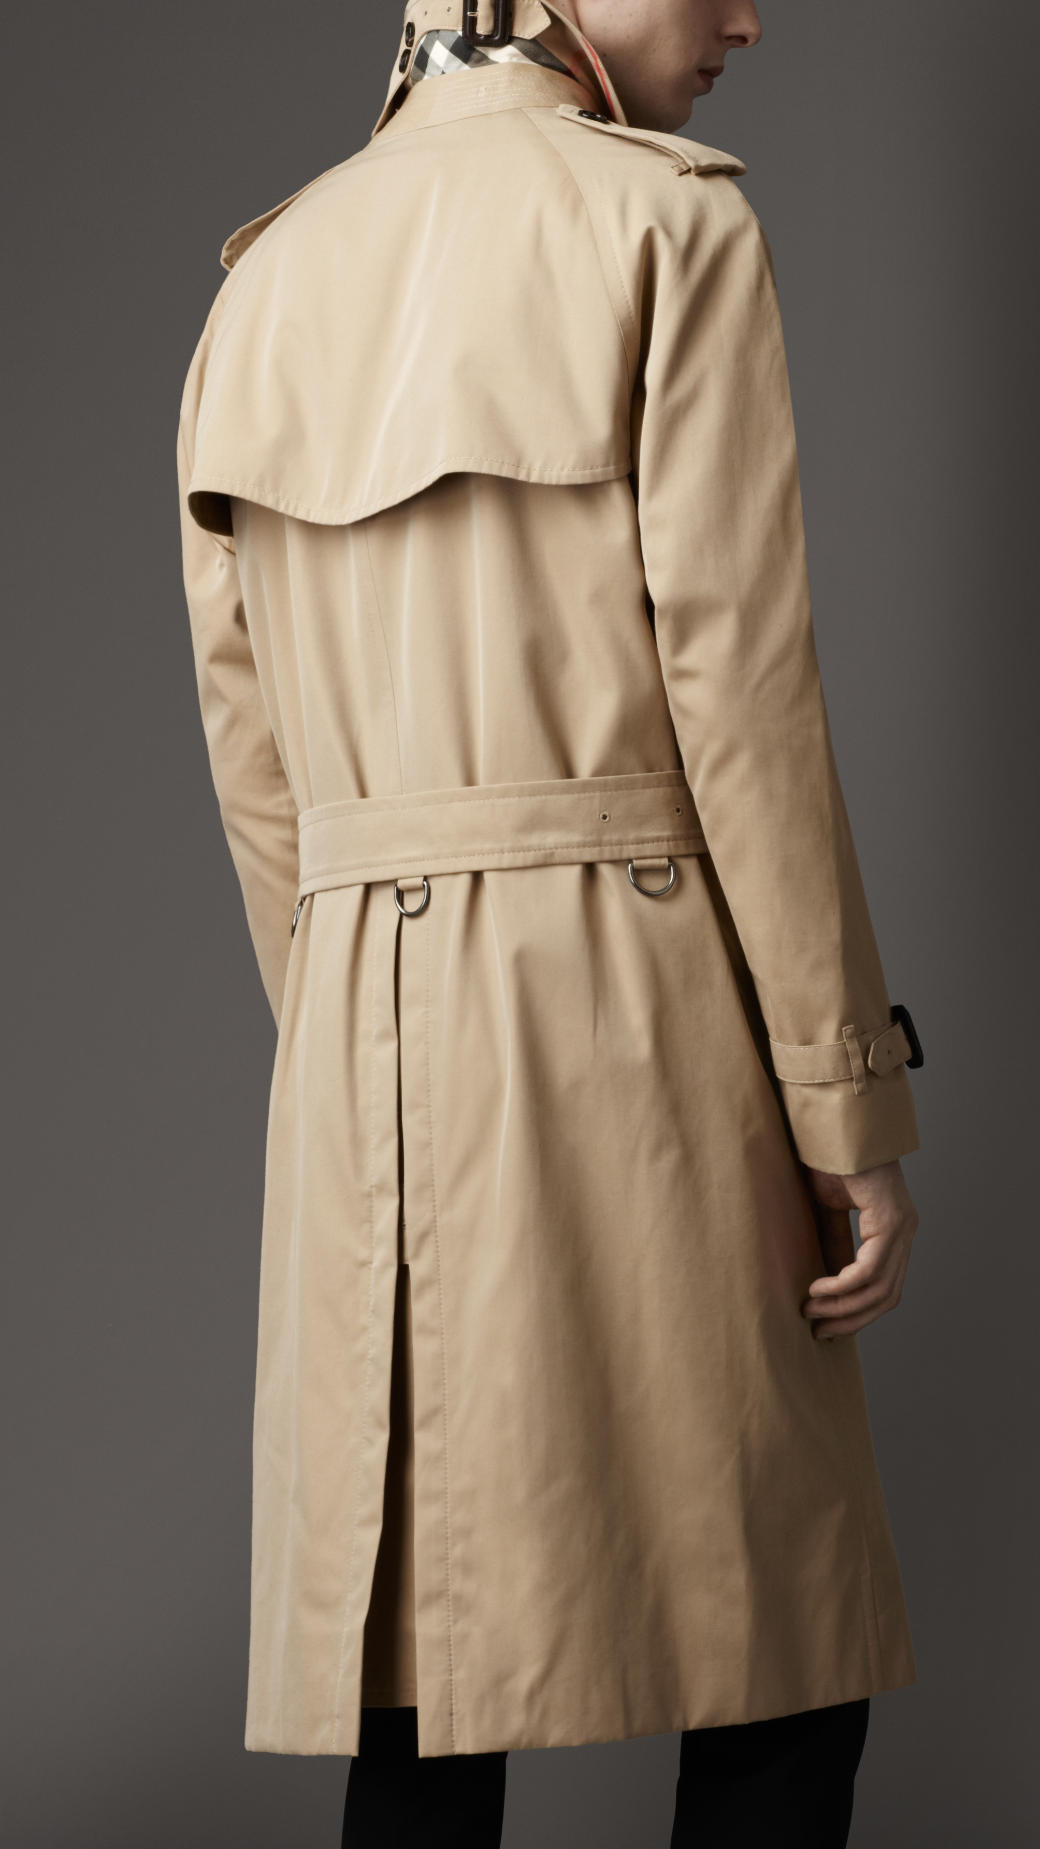 Lyst - Burberry Heritage Double Breasted Raglan Trench Coat in Natural ...